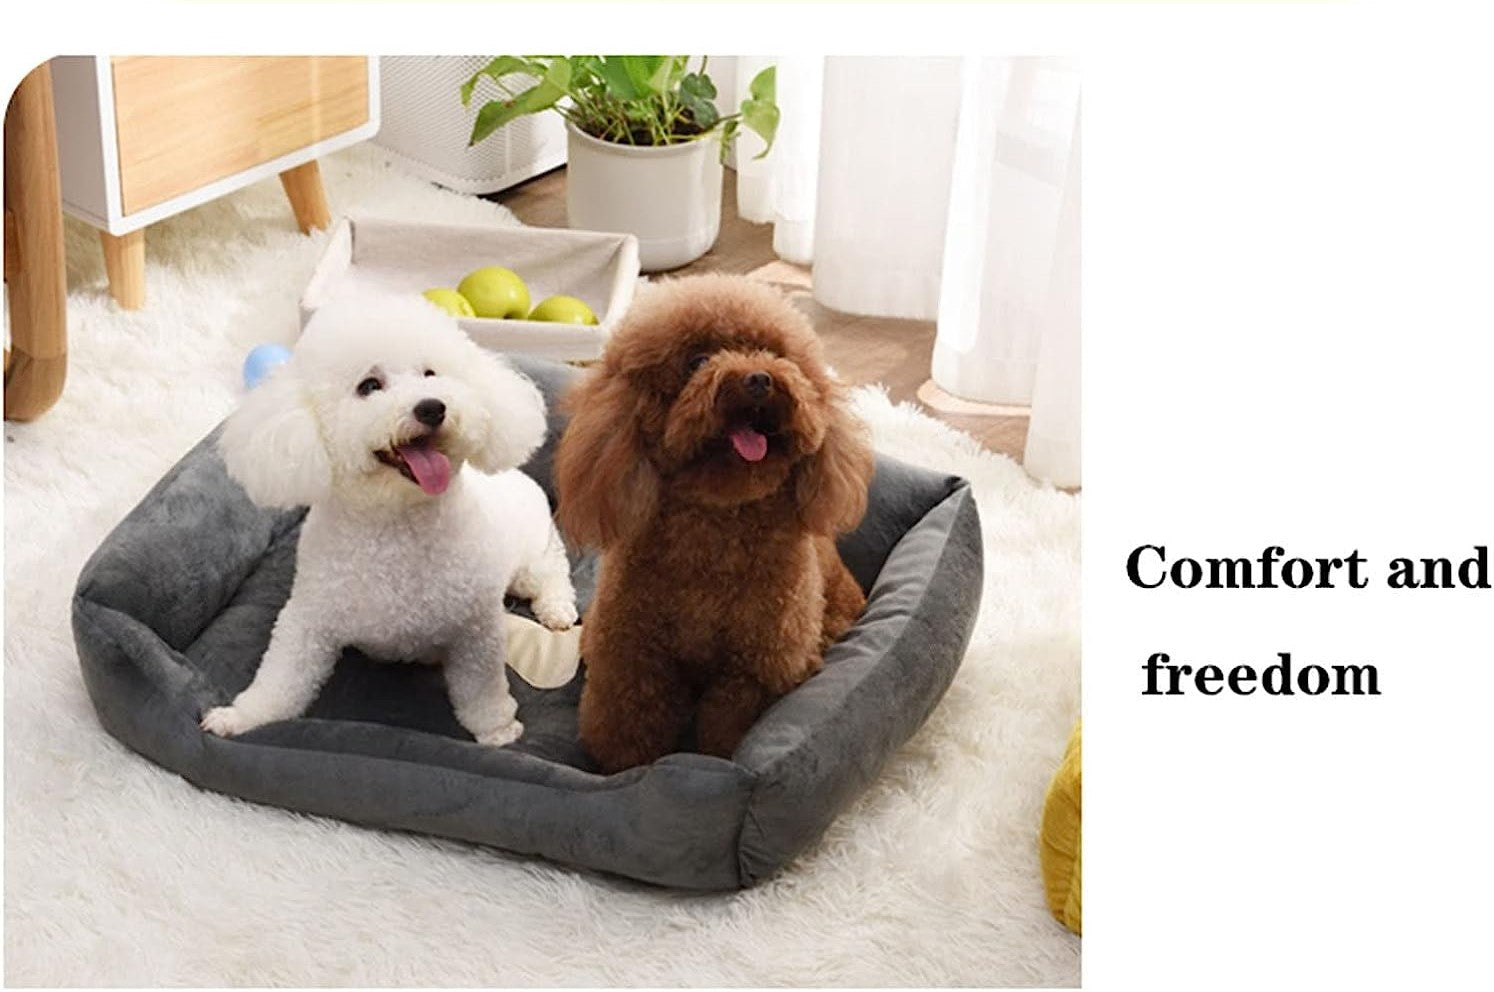 Super Soft Dog Bed with Waterproof Bottom - Warm Bed/Sofa For Dog & Cat - Cream & Grey